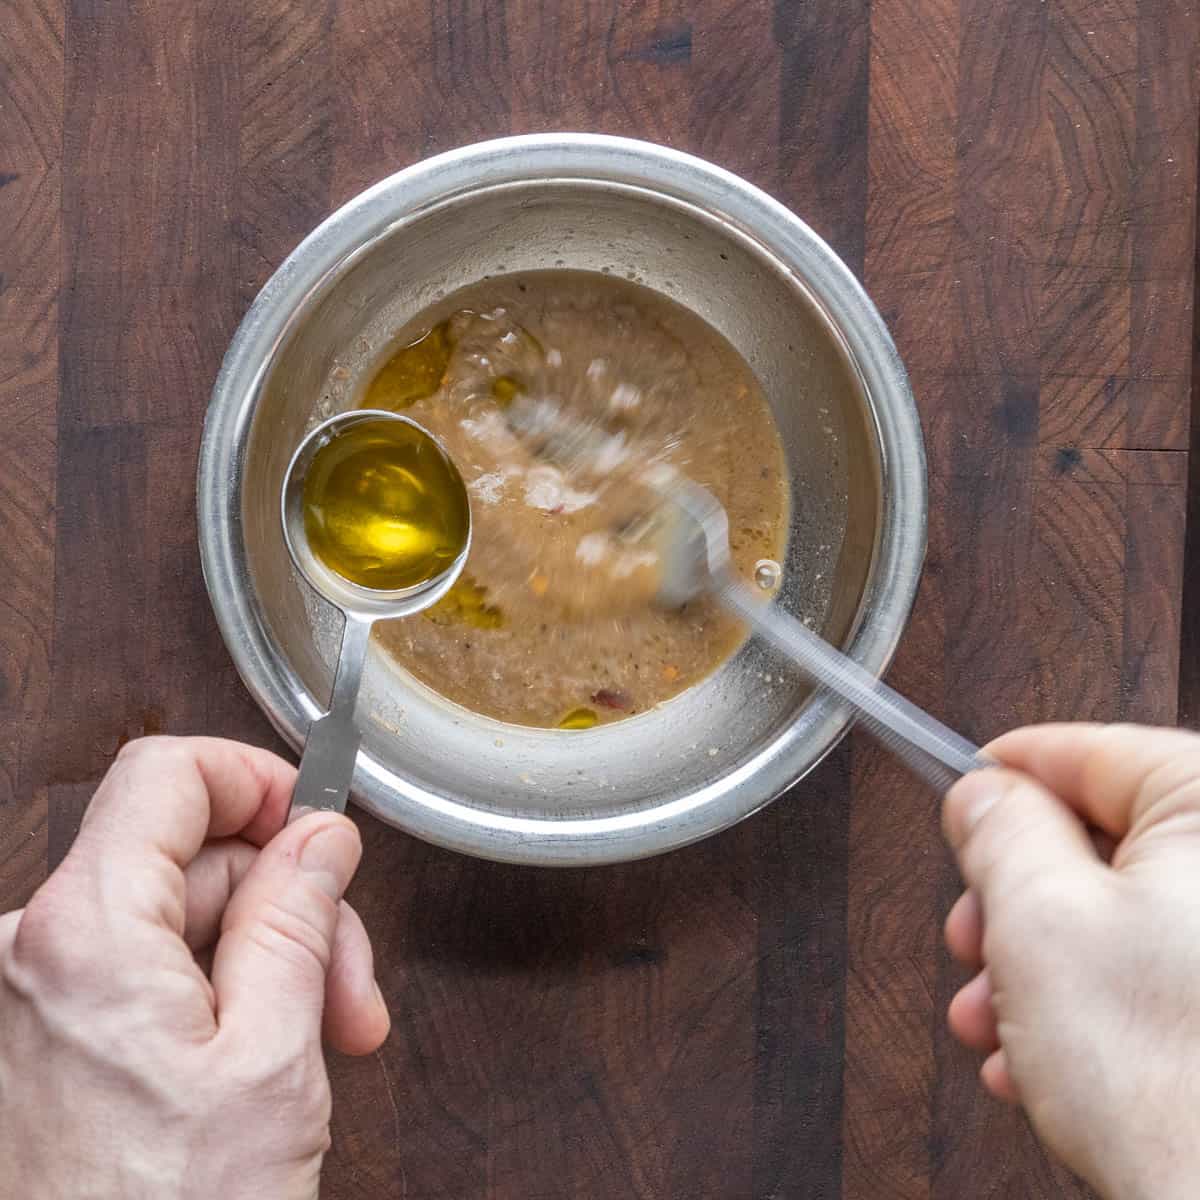 Whisking olive oil into a bowl of anchovy vinaigrette